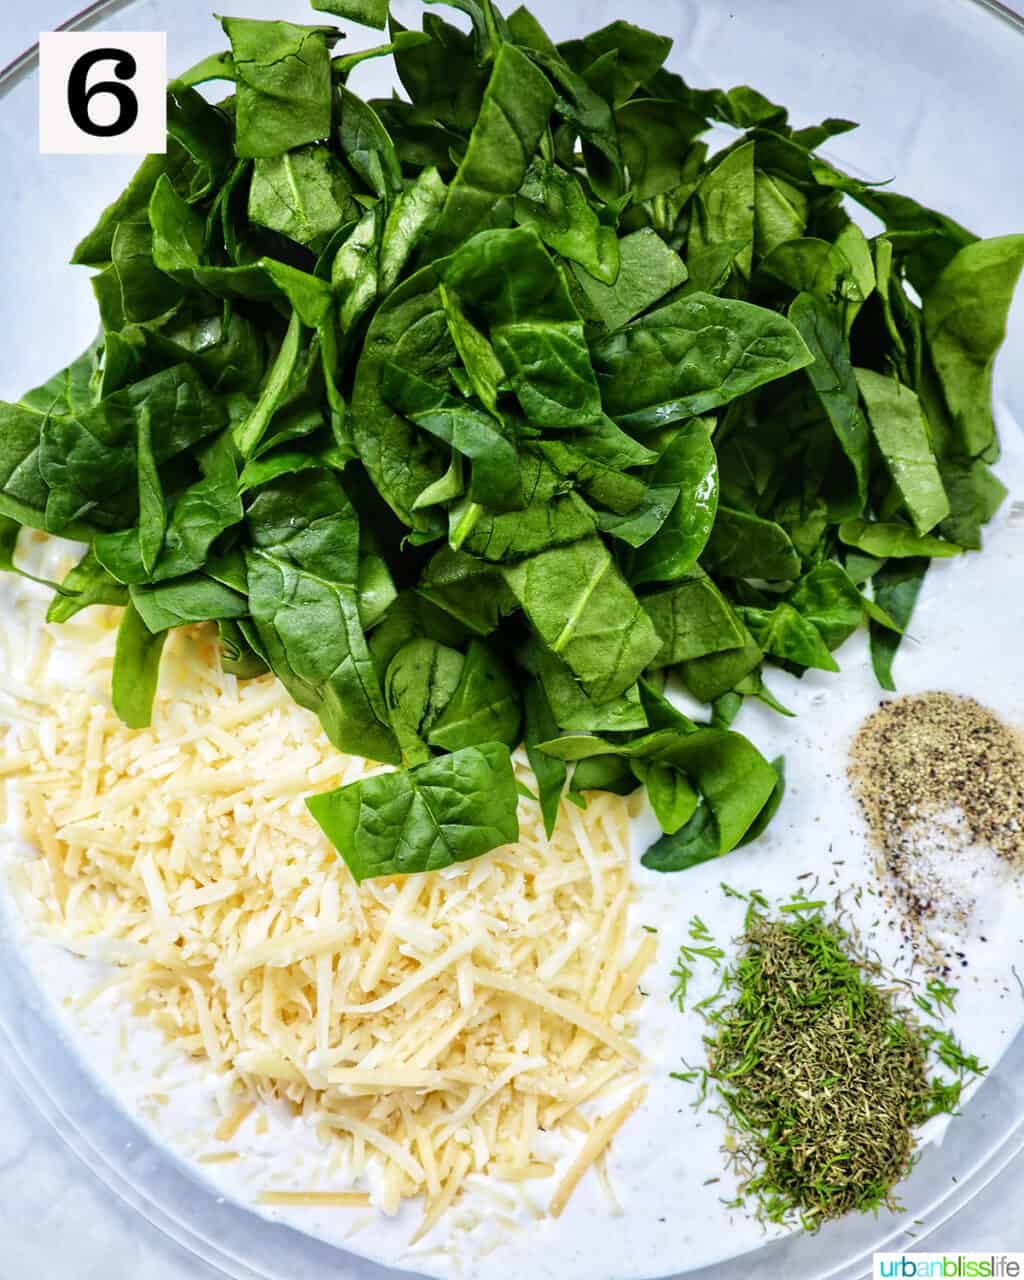 bowl with sliced spinach, shredded cheese, and herbs and seasonings.